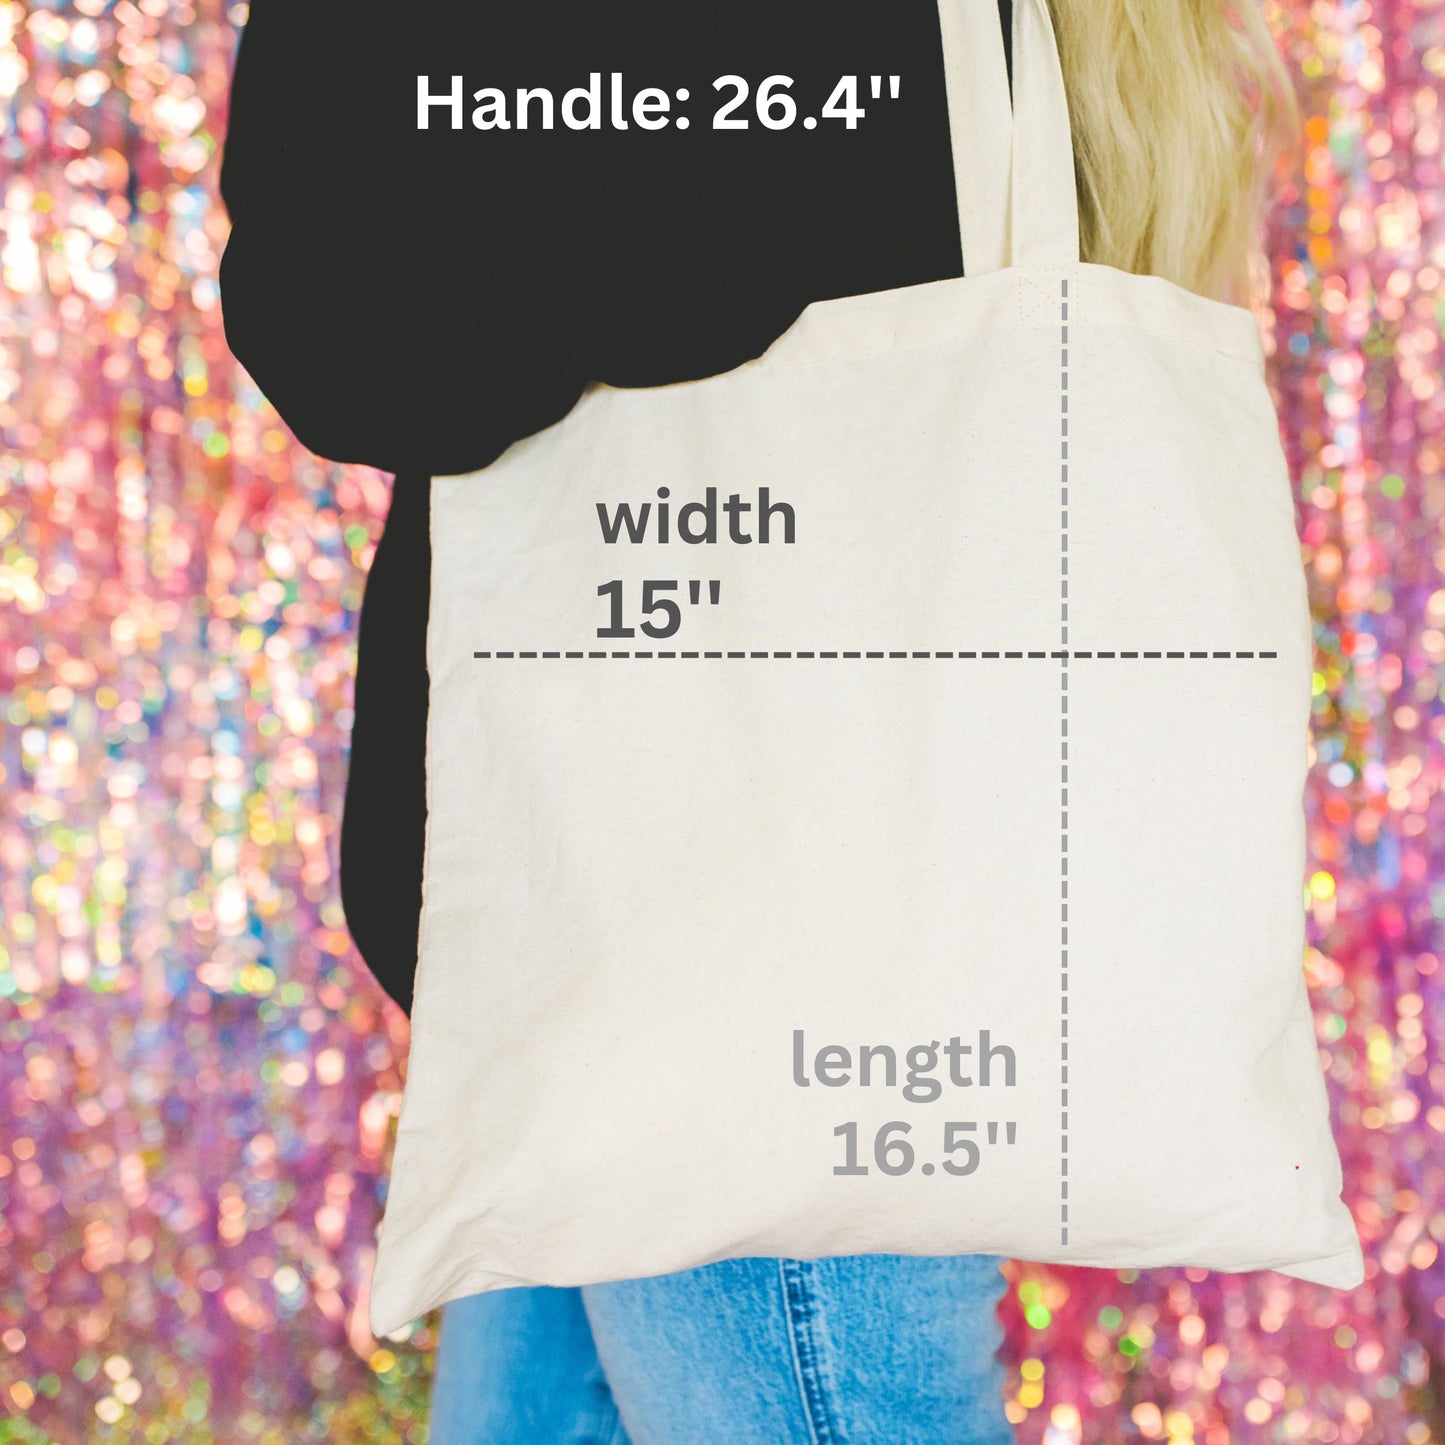 Would You Kindly Fuck Off Disco Classic Tote Bag, 100% Cotton Shopping Bag